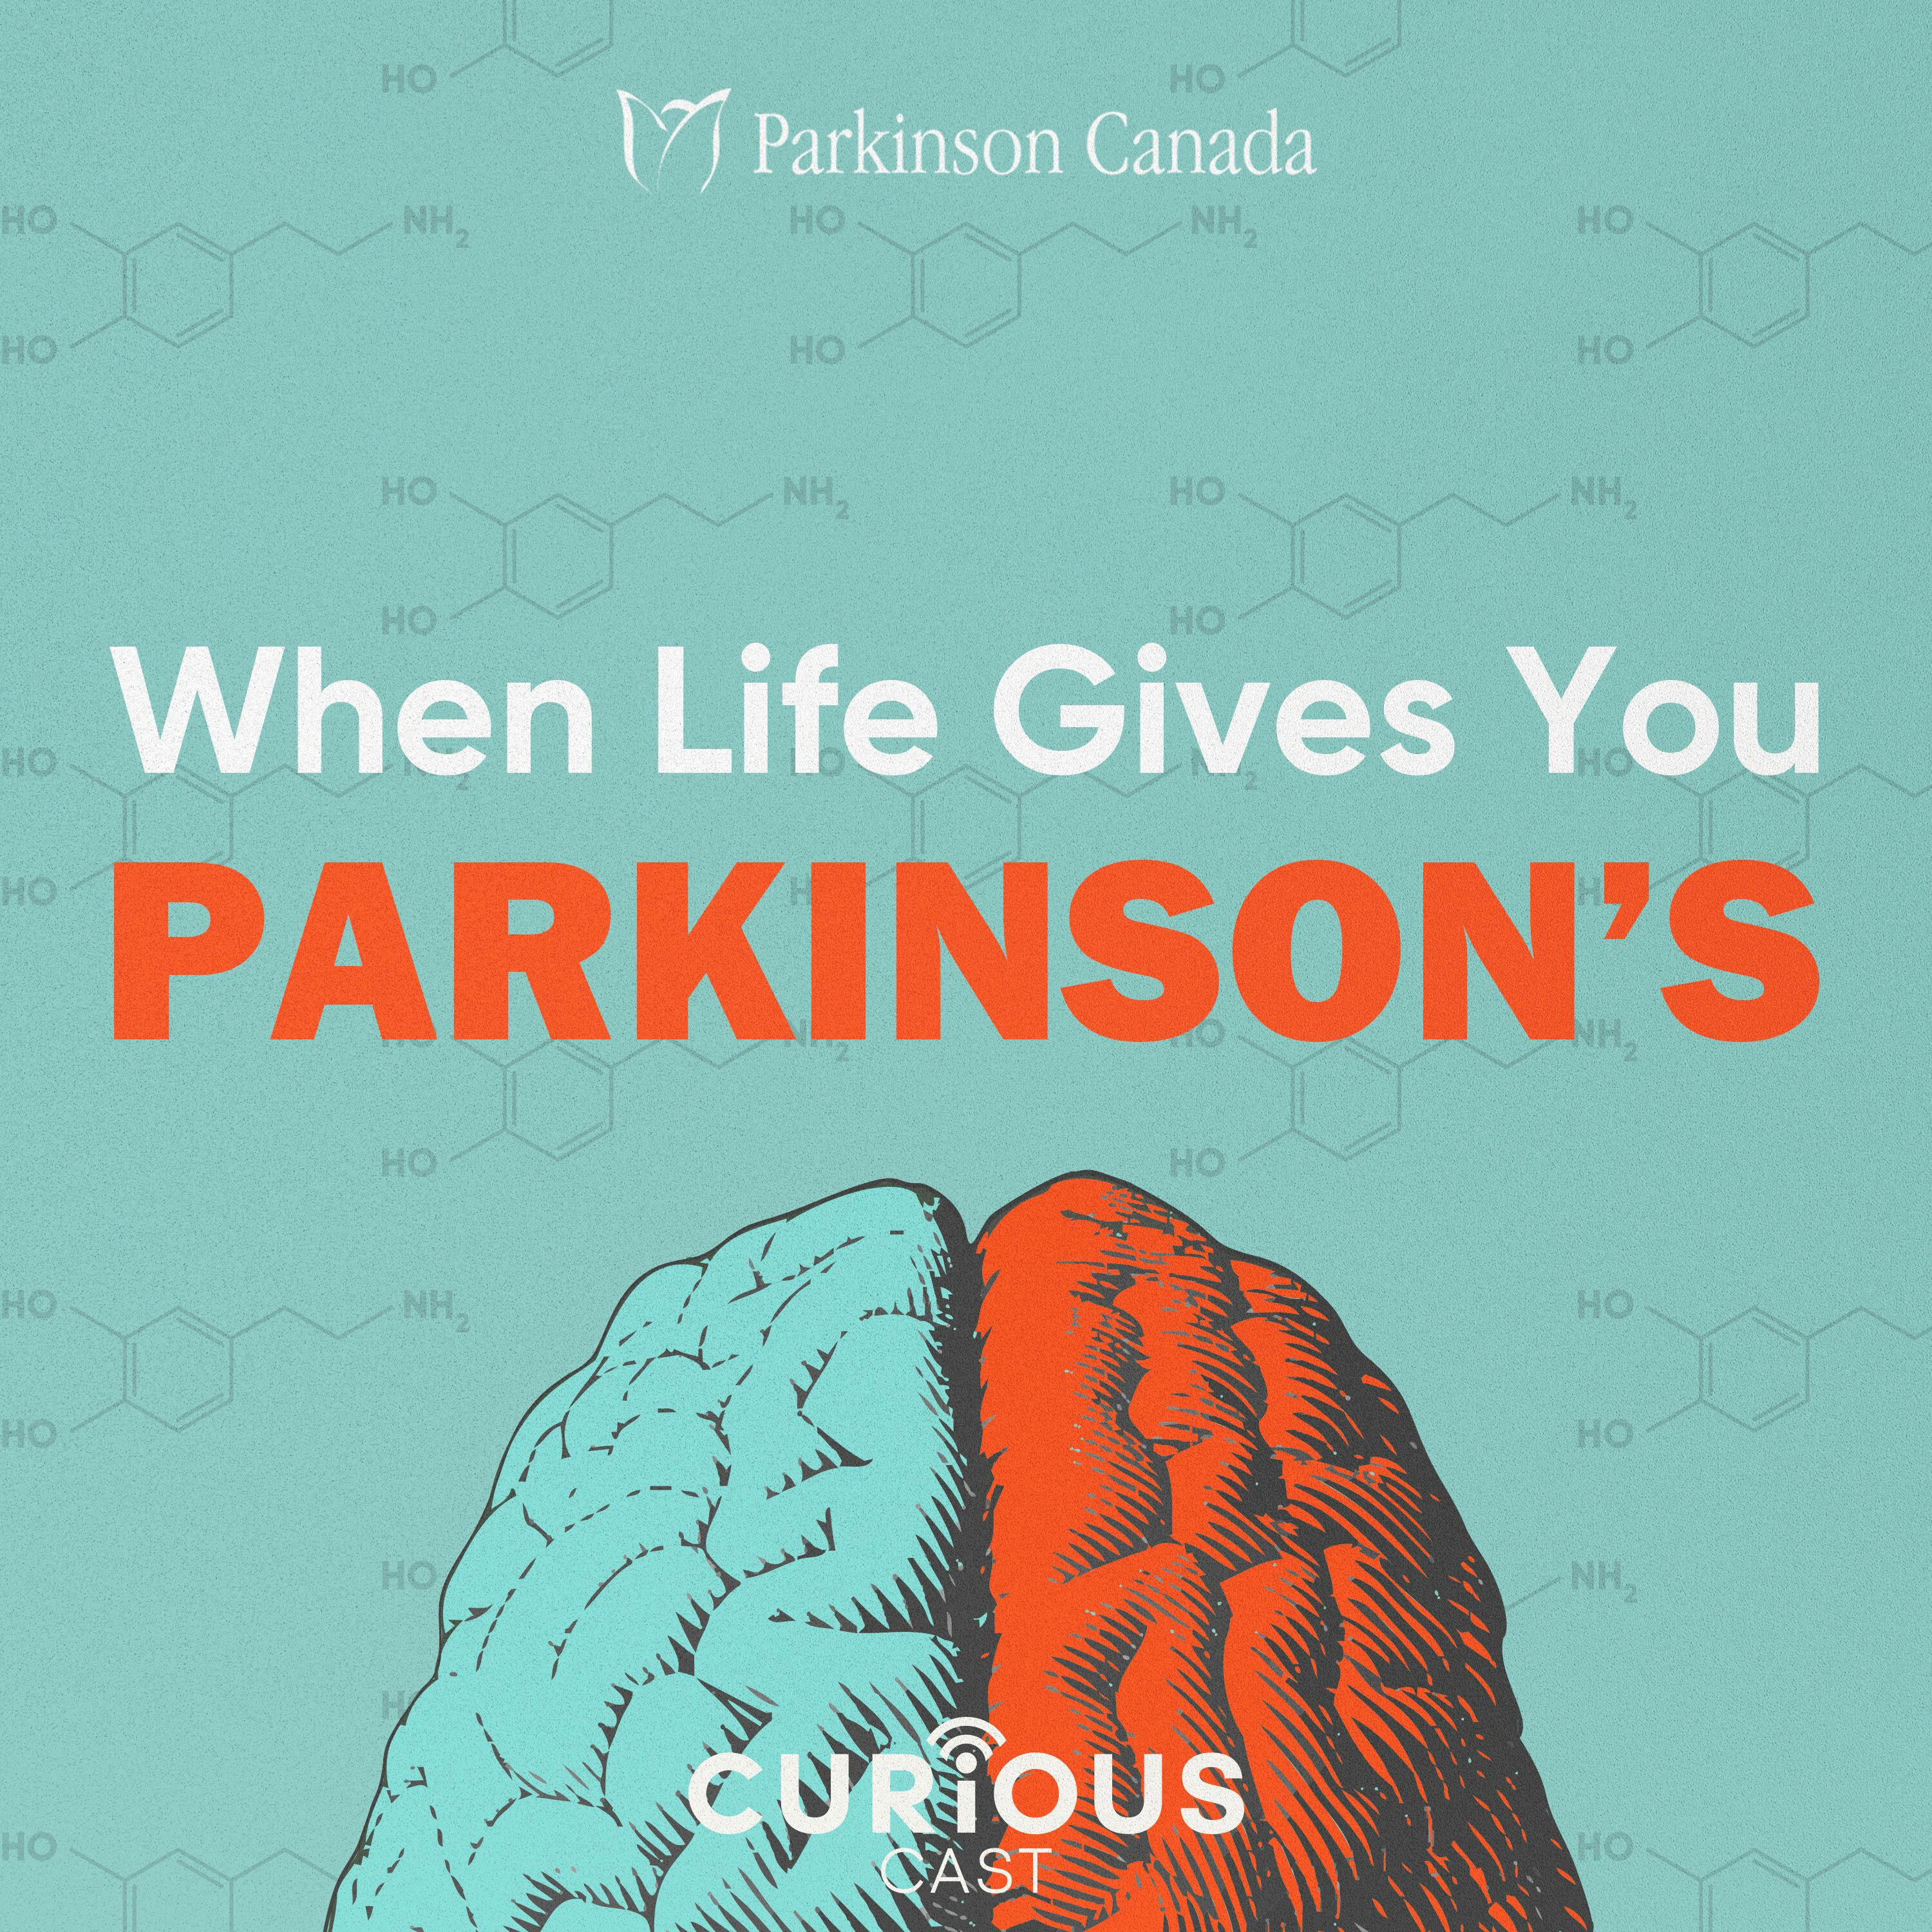 Popping Pills, Swapping Stories – Inside a Parkinson’s support group | 6